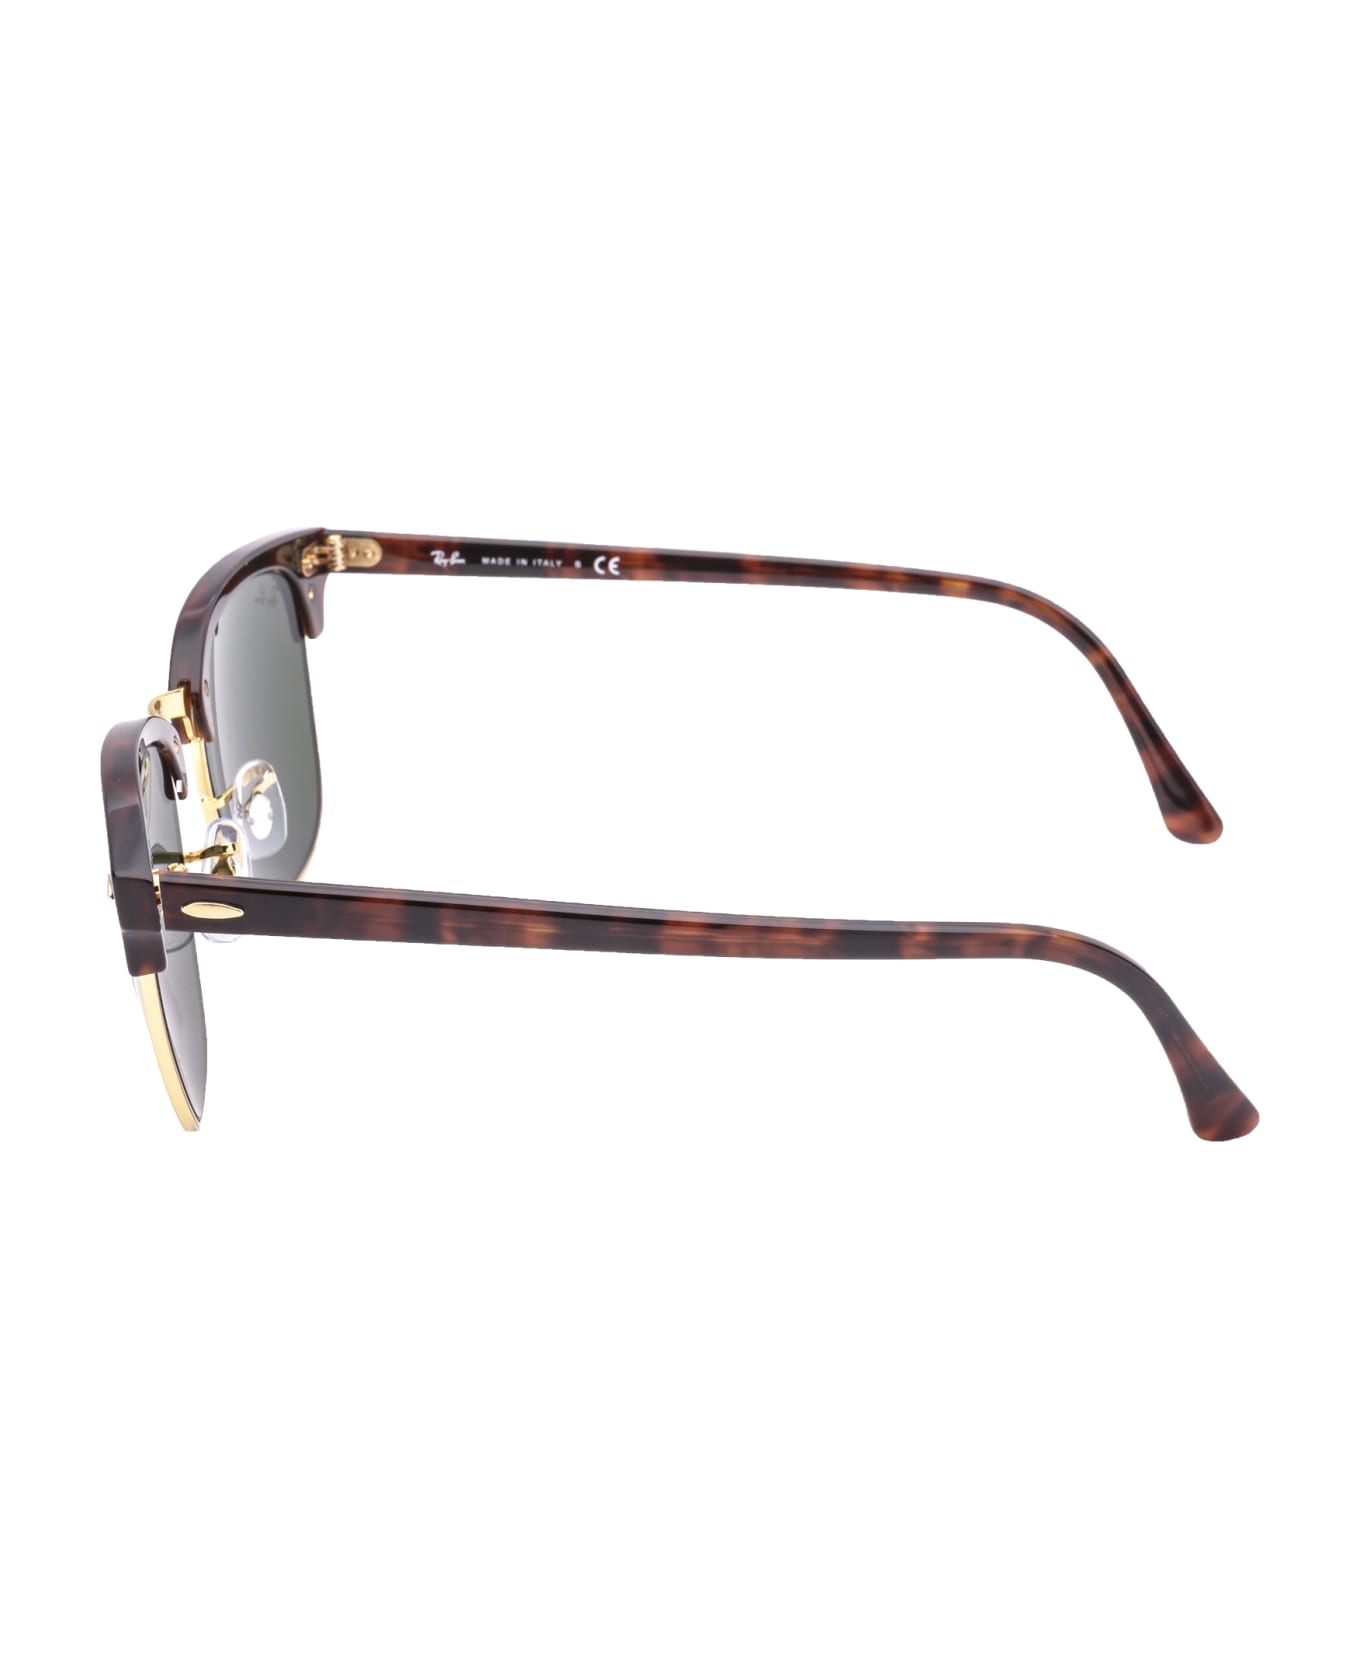 Ray-Ban Clubmaster Sunglasses - W0366 Tortoise On Gold